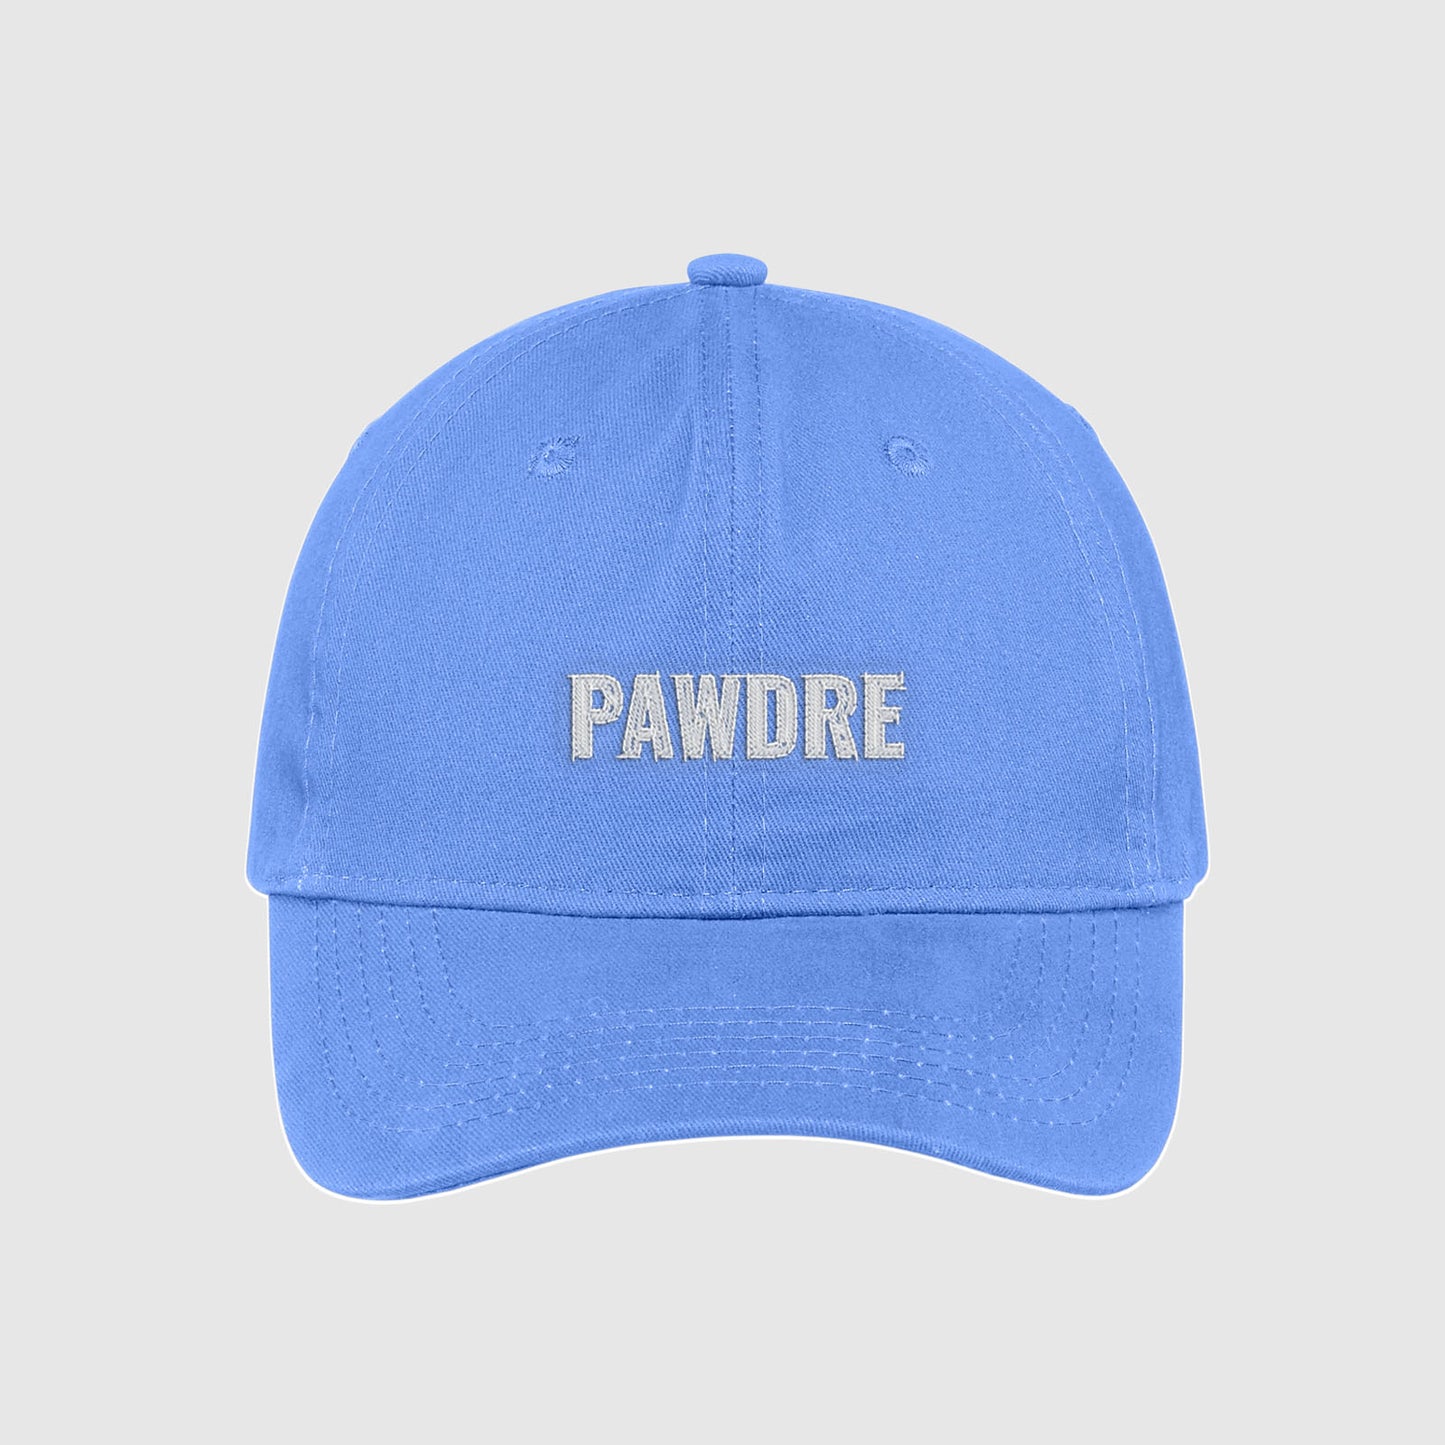 Carolina Blue Pawdre Hat embroidered with white text.